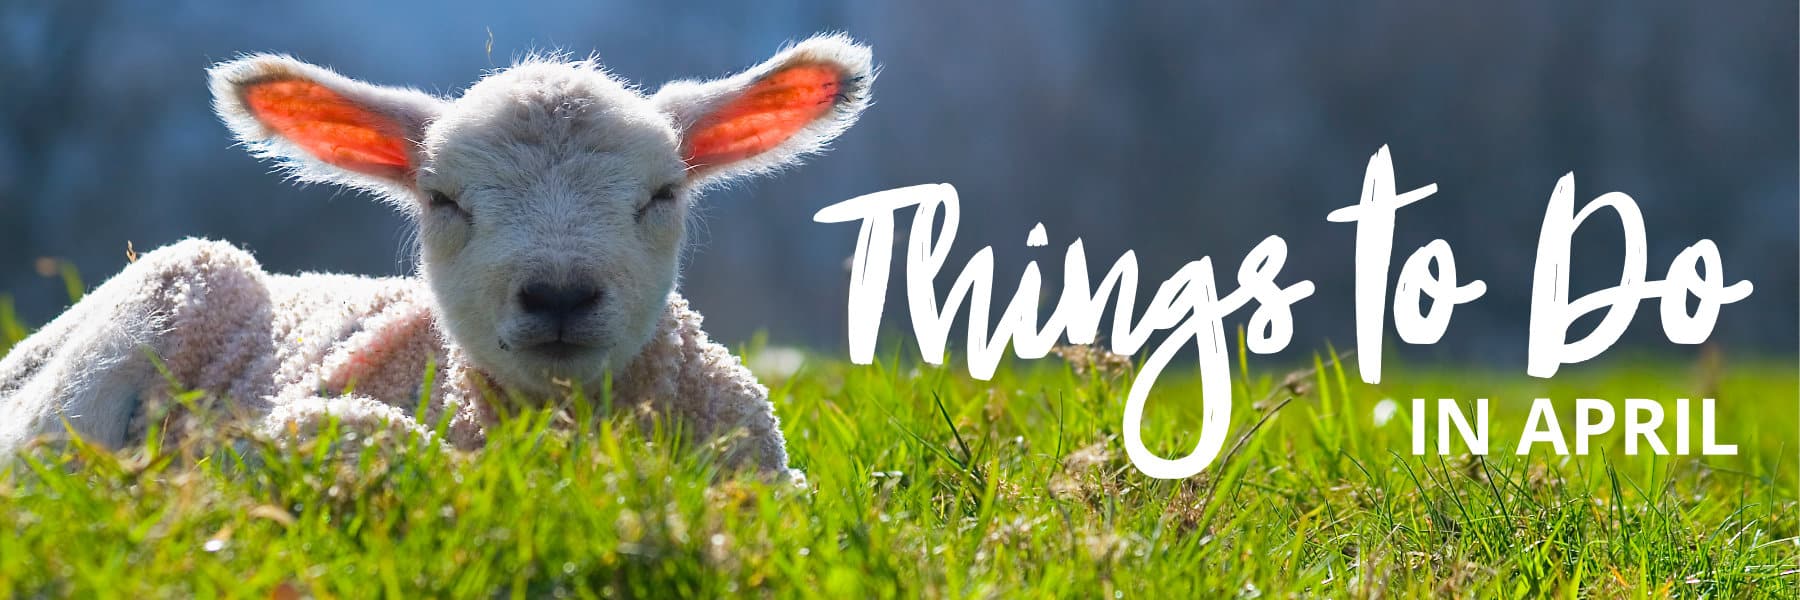 Things to do in April cover photo with lamb lying in the grass